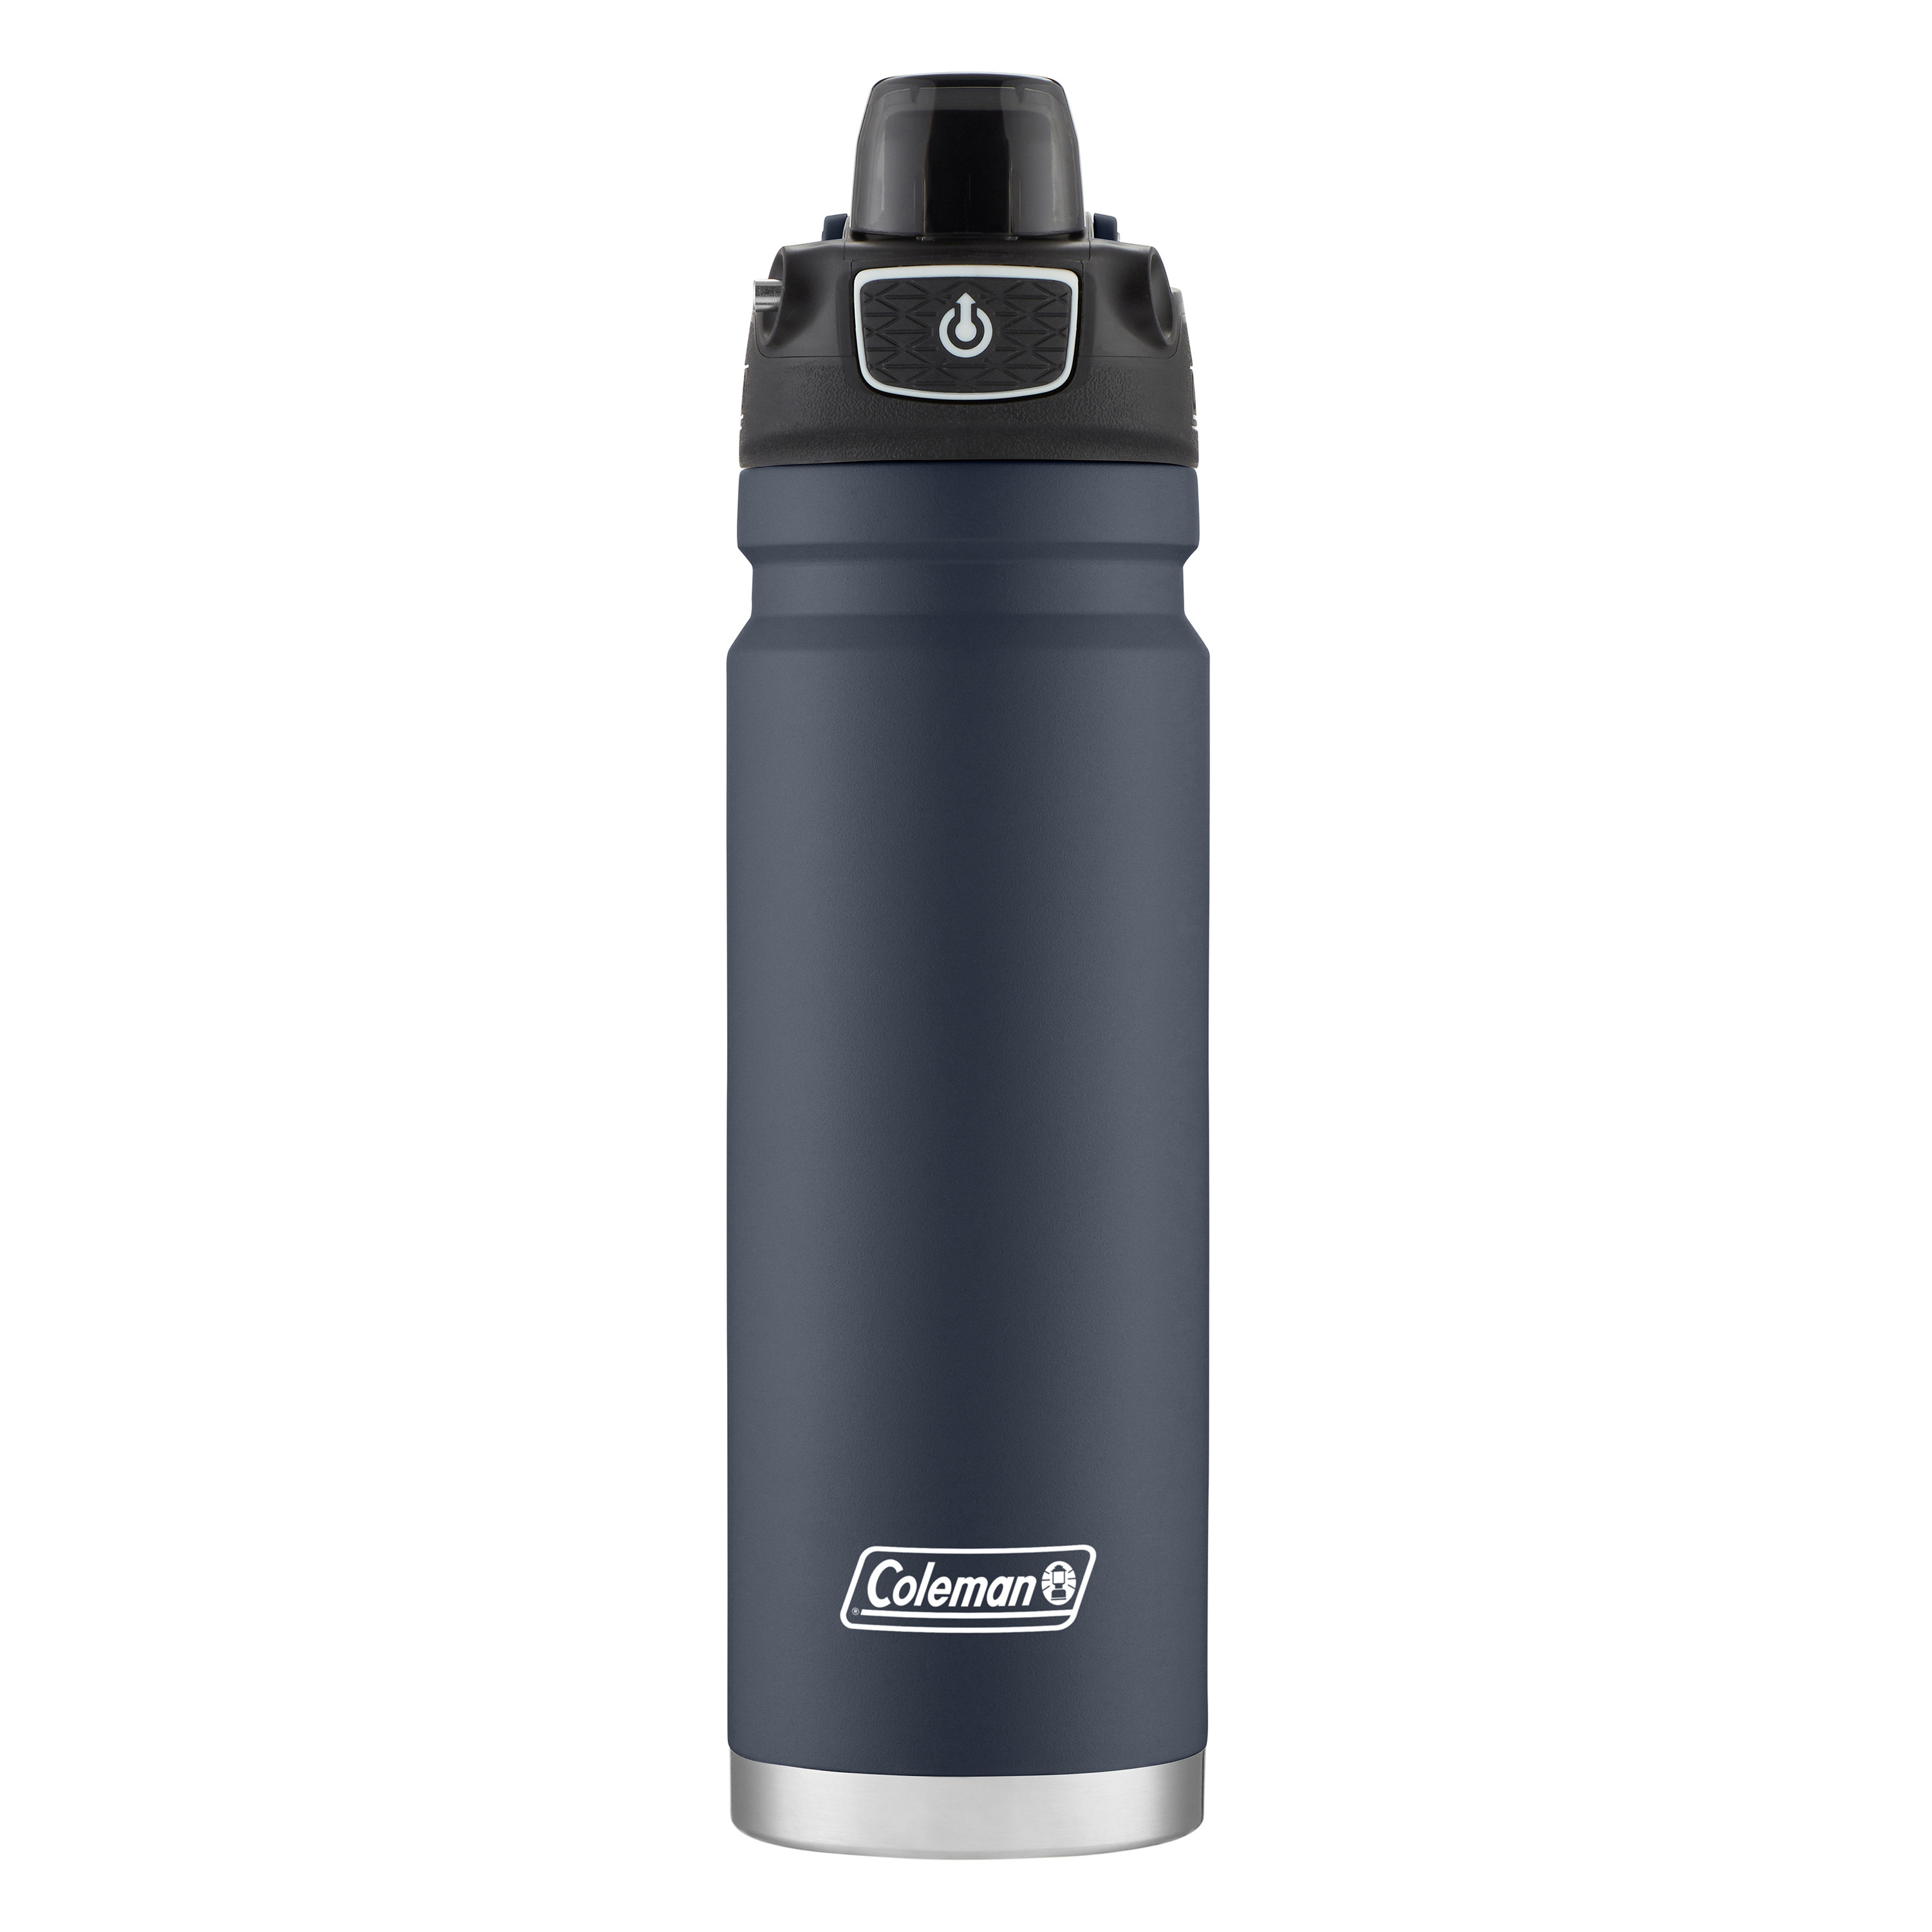 Coleman Burst Poptop Stainless Steel Insulated Water Bottle, 24 oz, Blue Nights - image 1 of 7